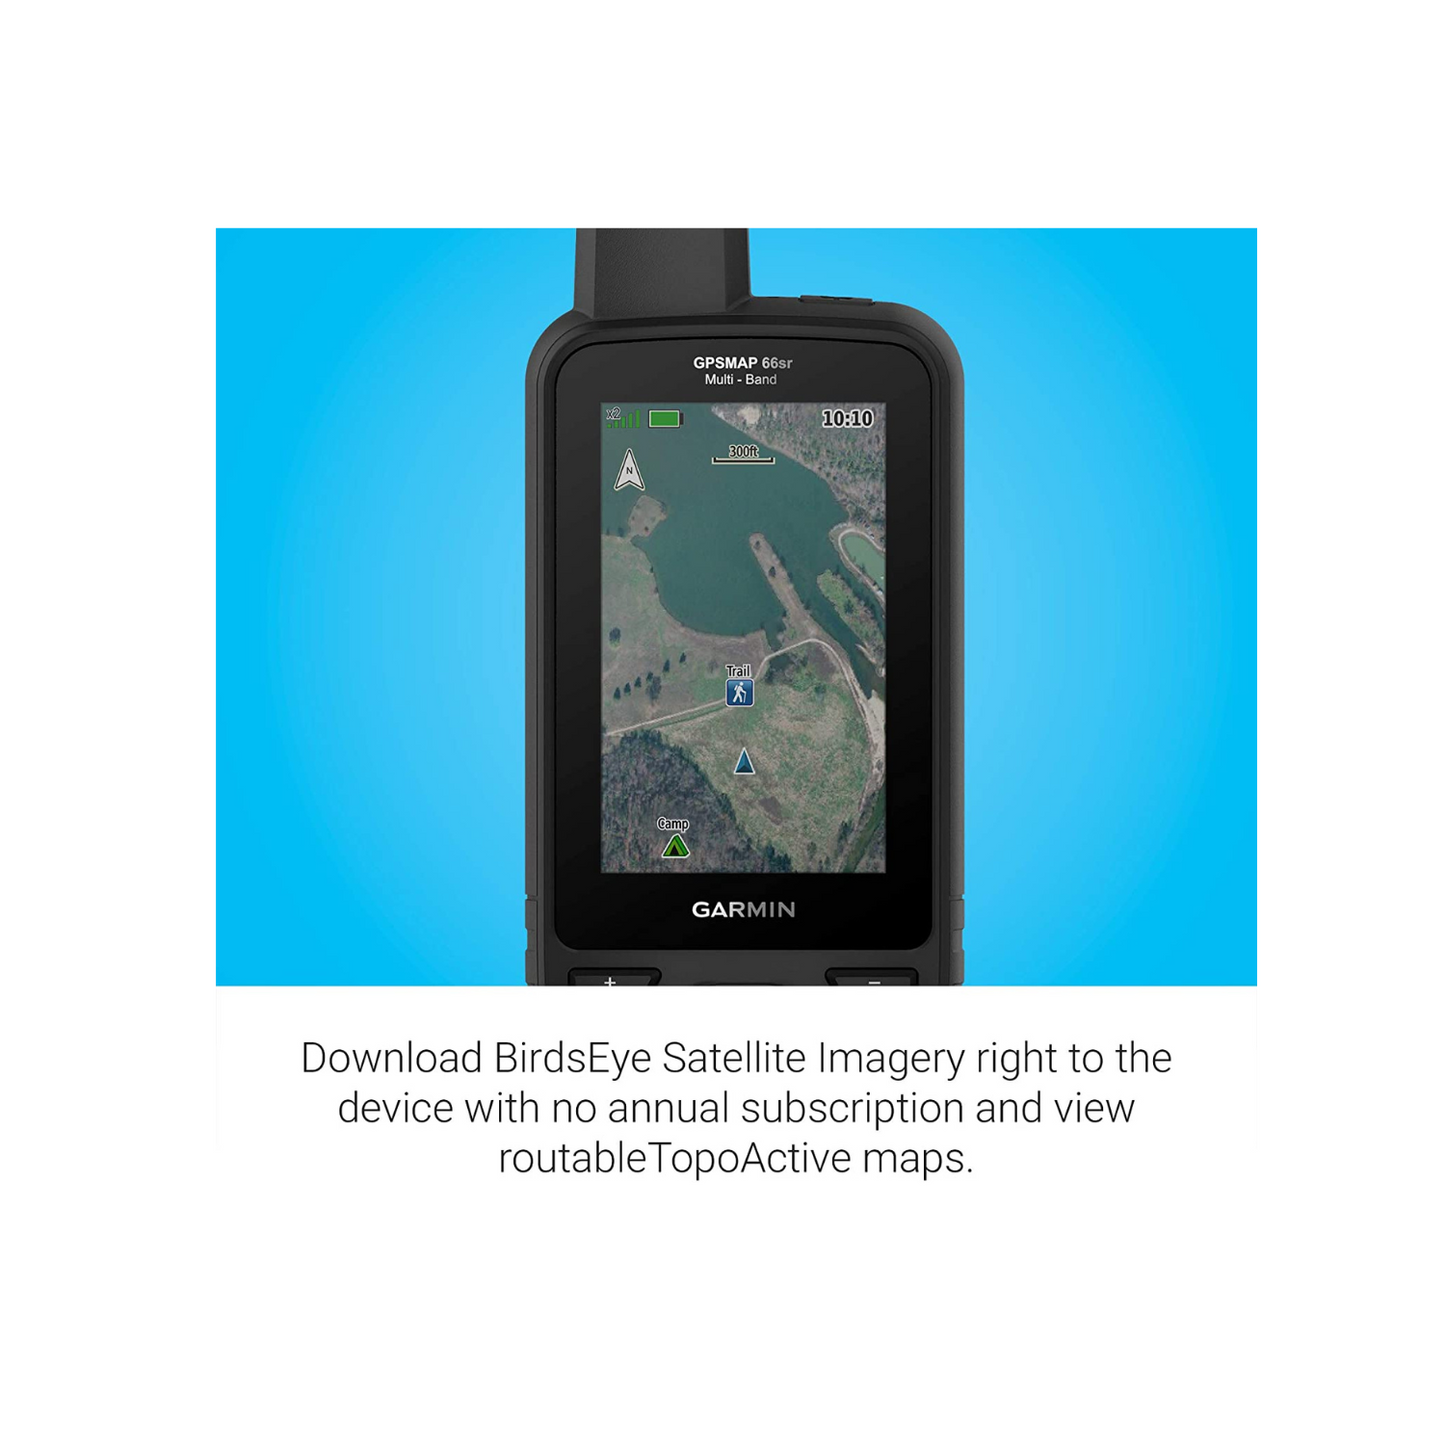 Garmin GPSMAP 66sr, Hiking Handheld with Expanded GNSS